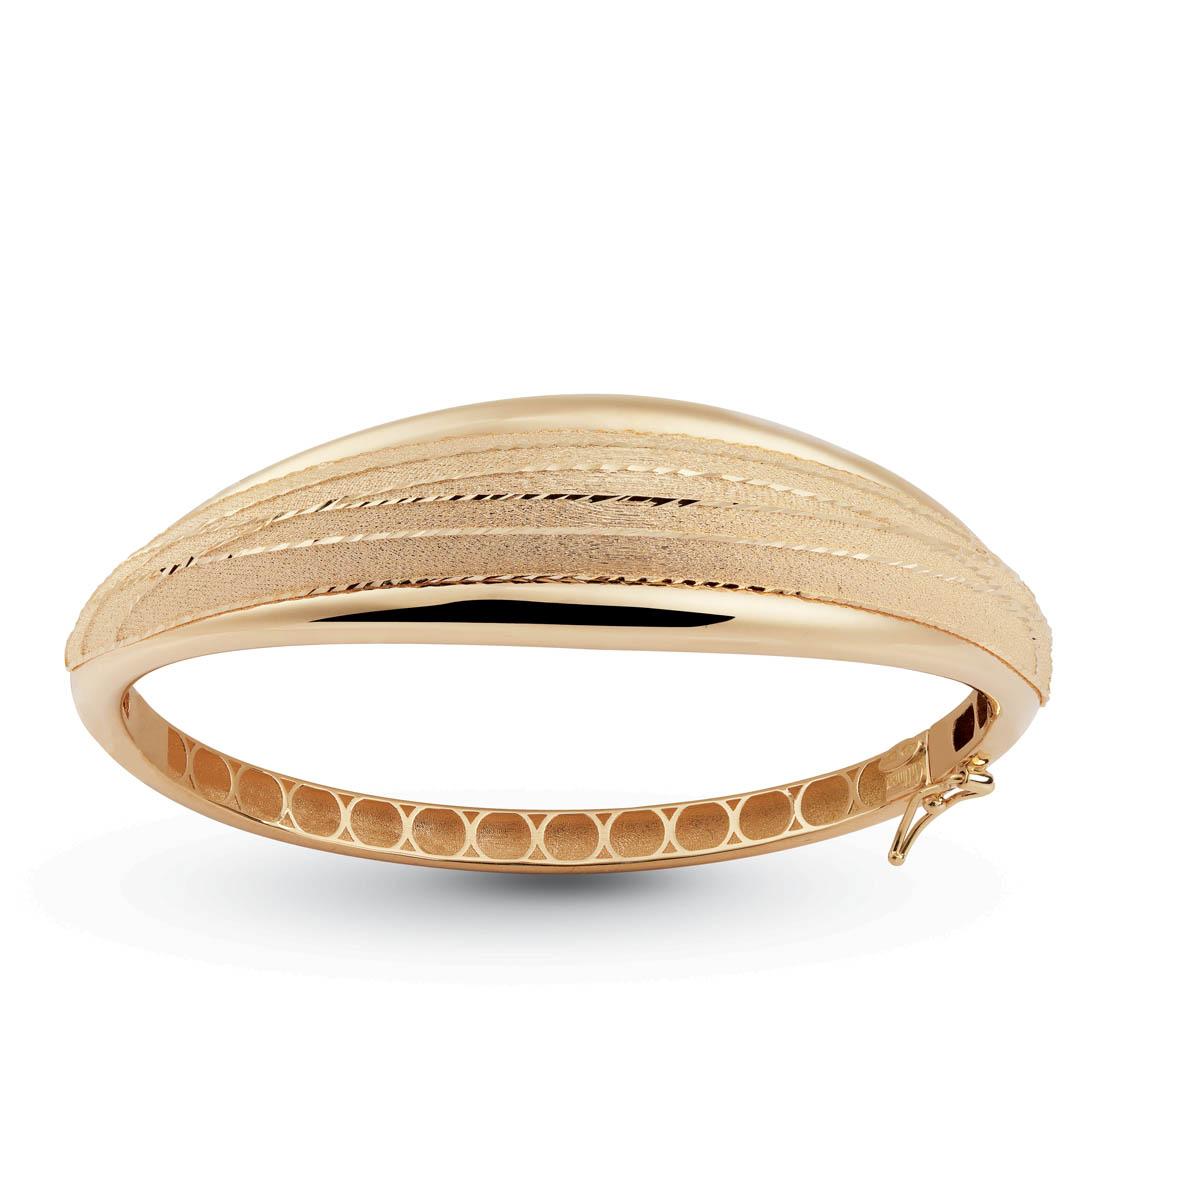 Rounded bangle bangle in 18kt polished and satin gold - BP011